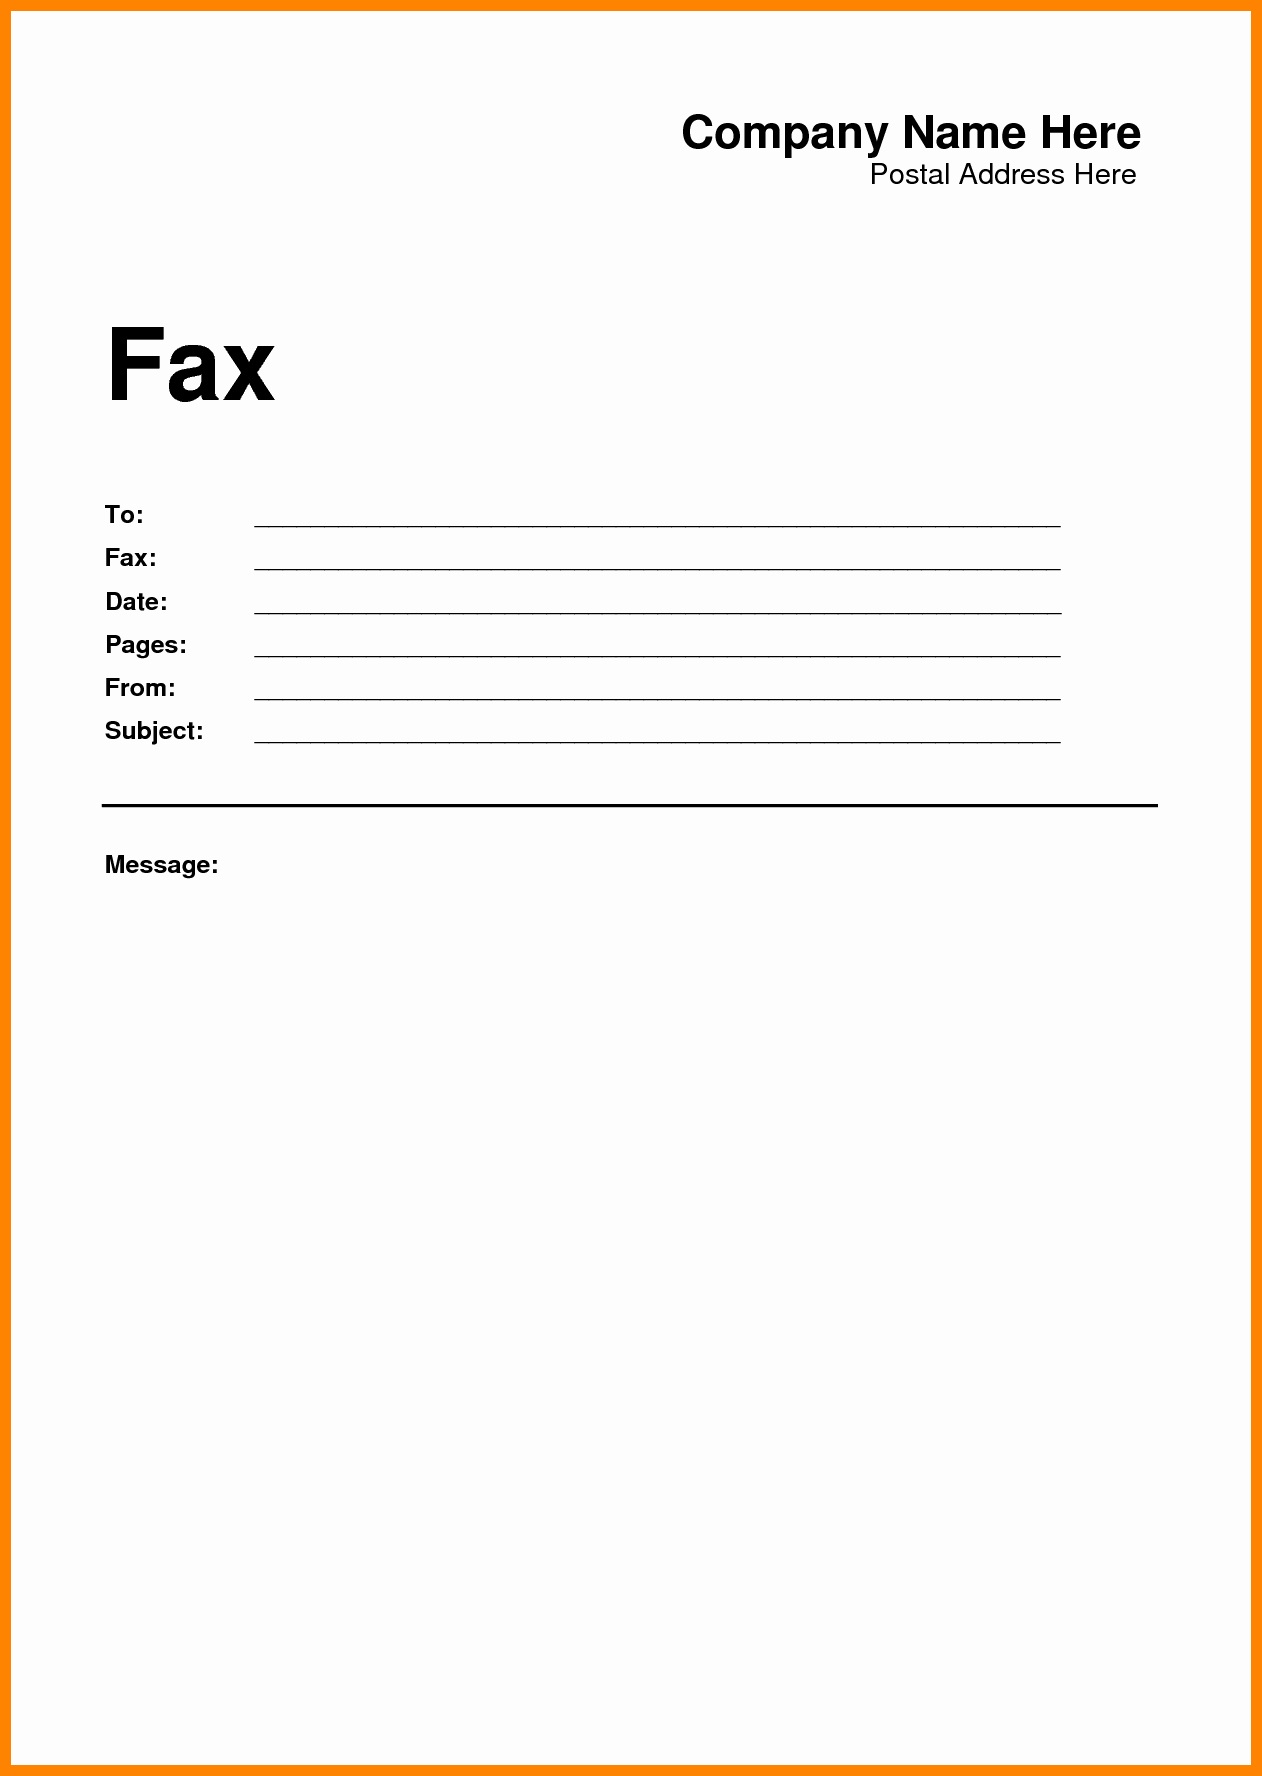 Free Fax Cover Sheets Download New 6 Free Fax Cover Sheet